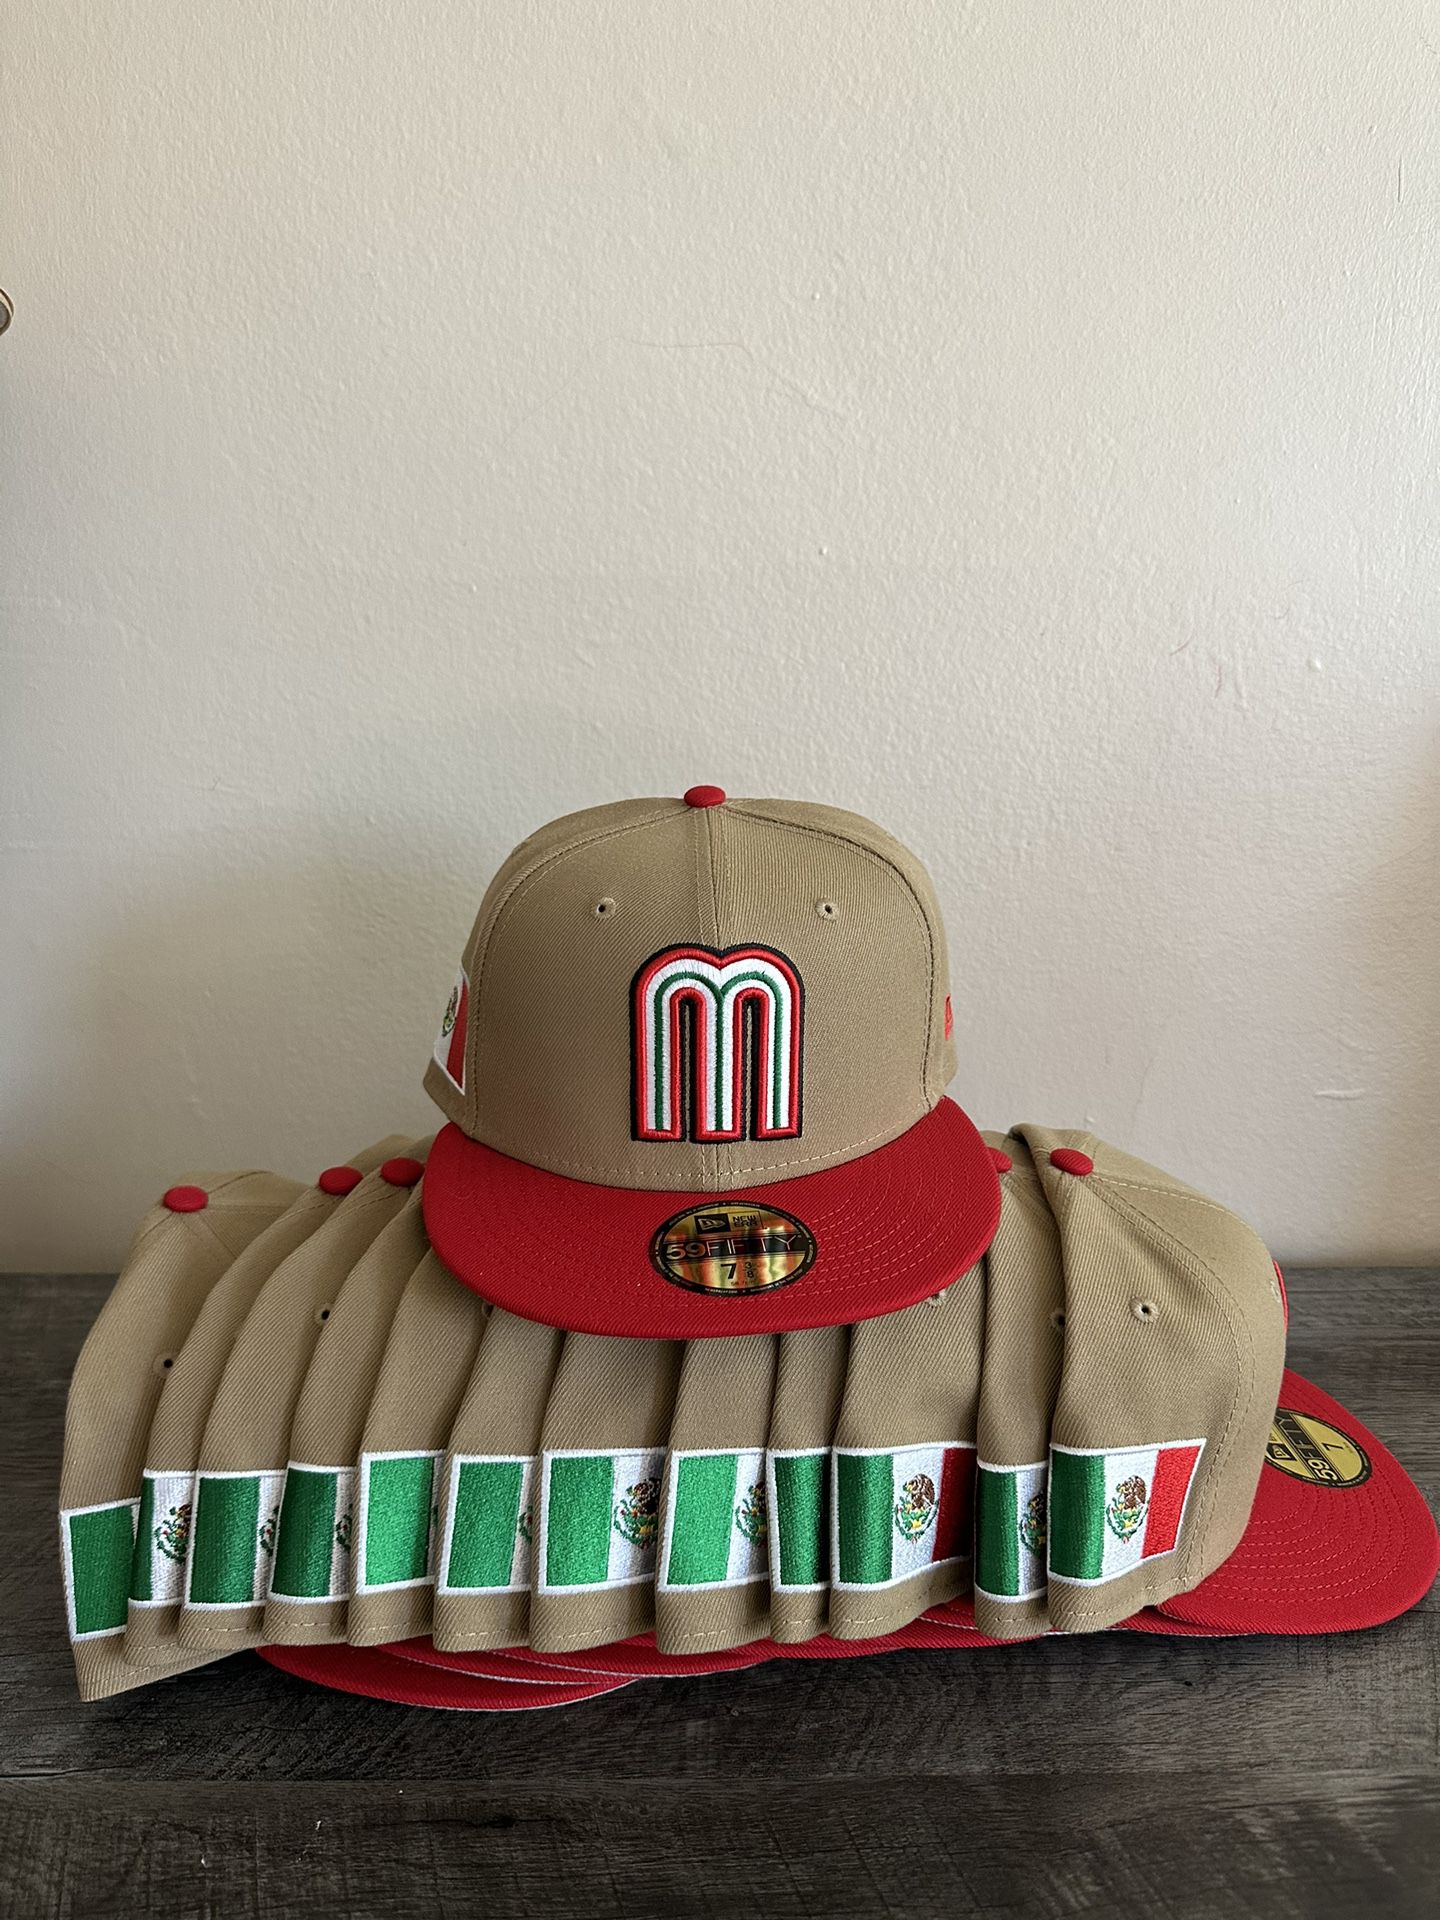 WBC 2023 Mexico New Era hat World Baseball Classic Limited Edition Khaki 7  1/2 for Sale in Bloomfield Hills, MI - OfferUp